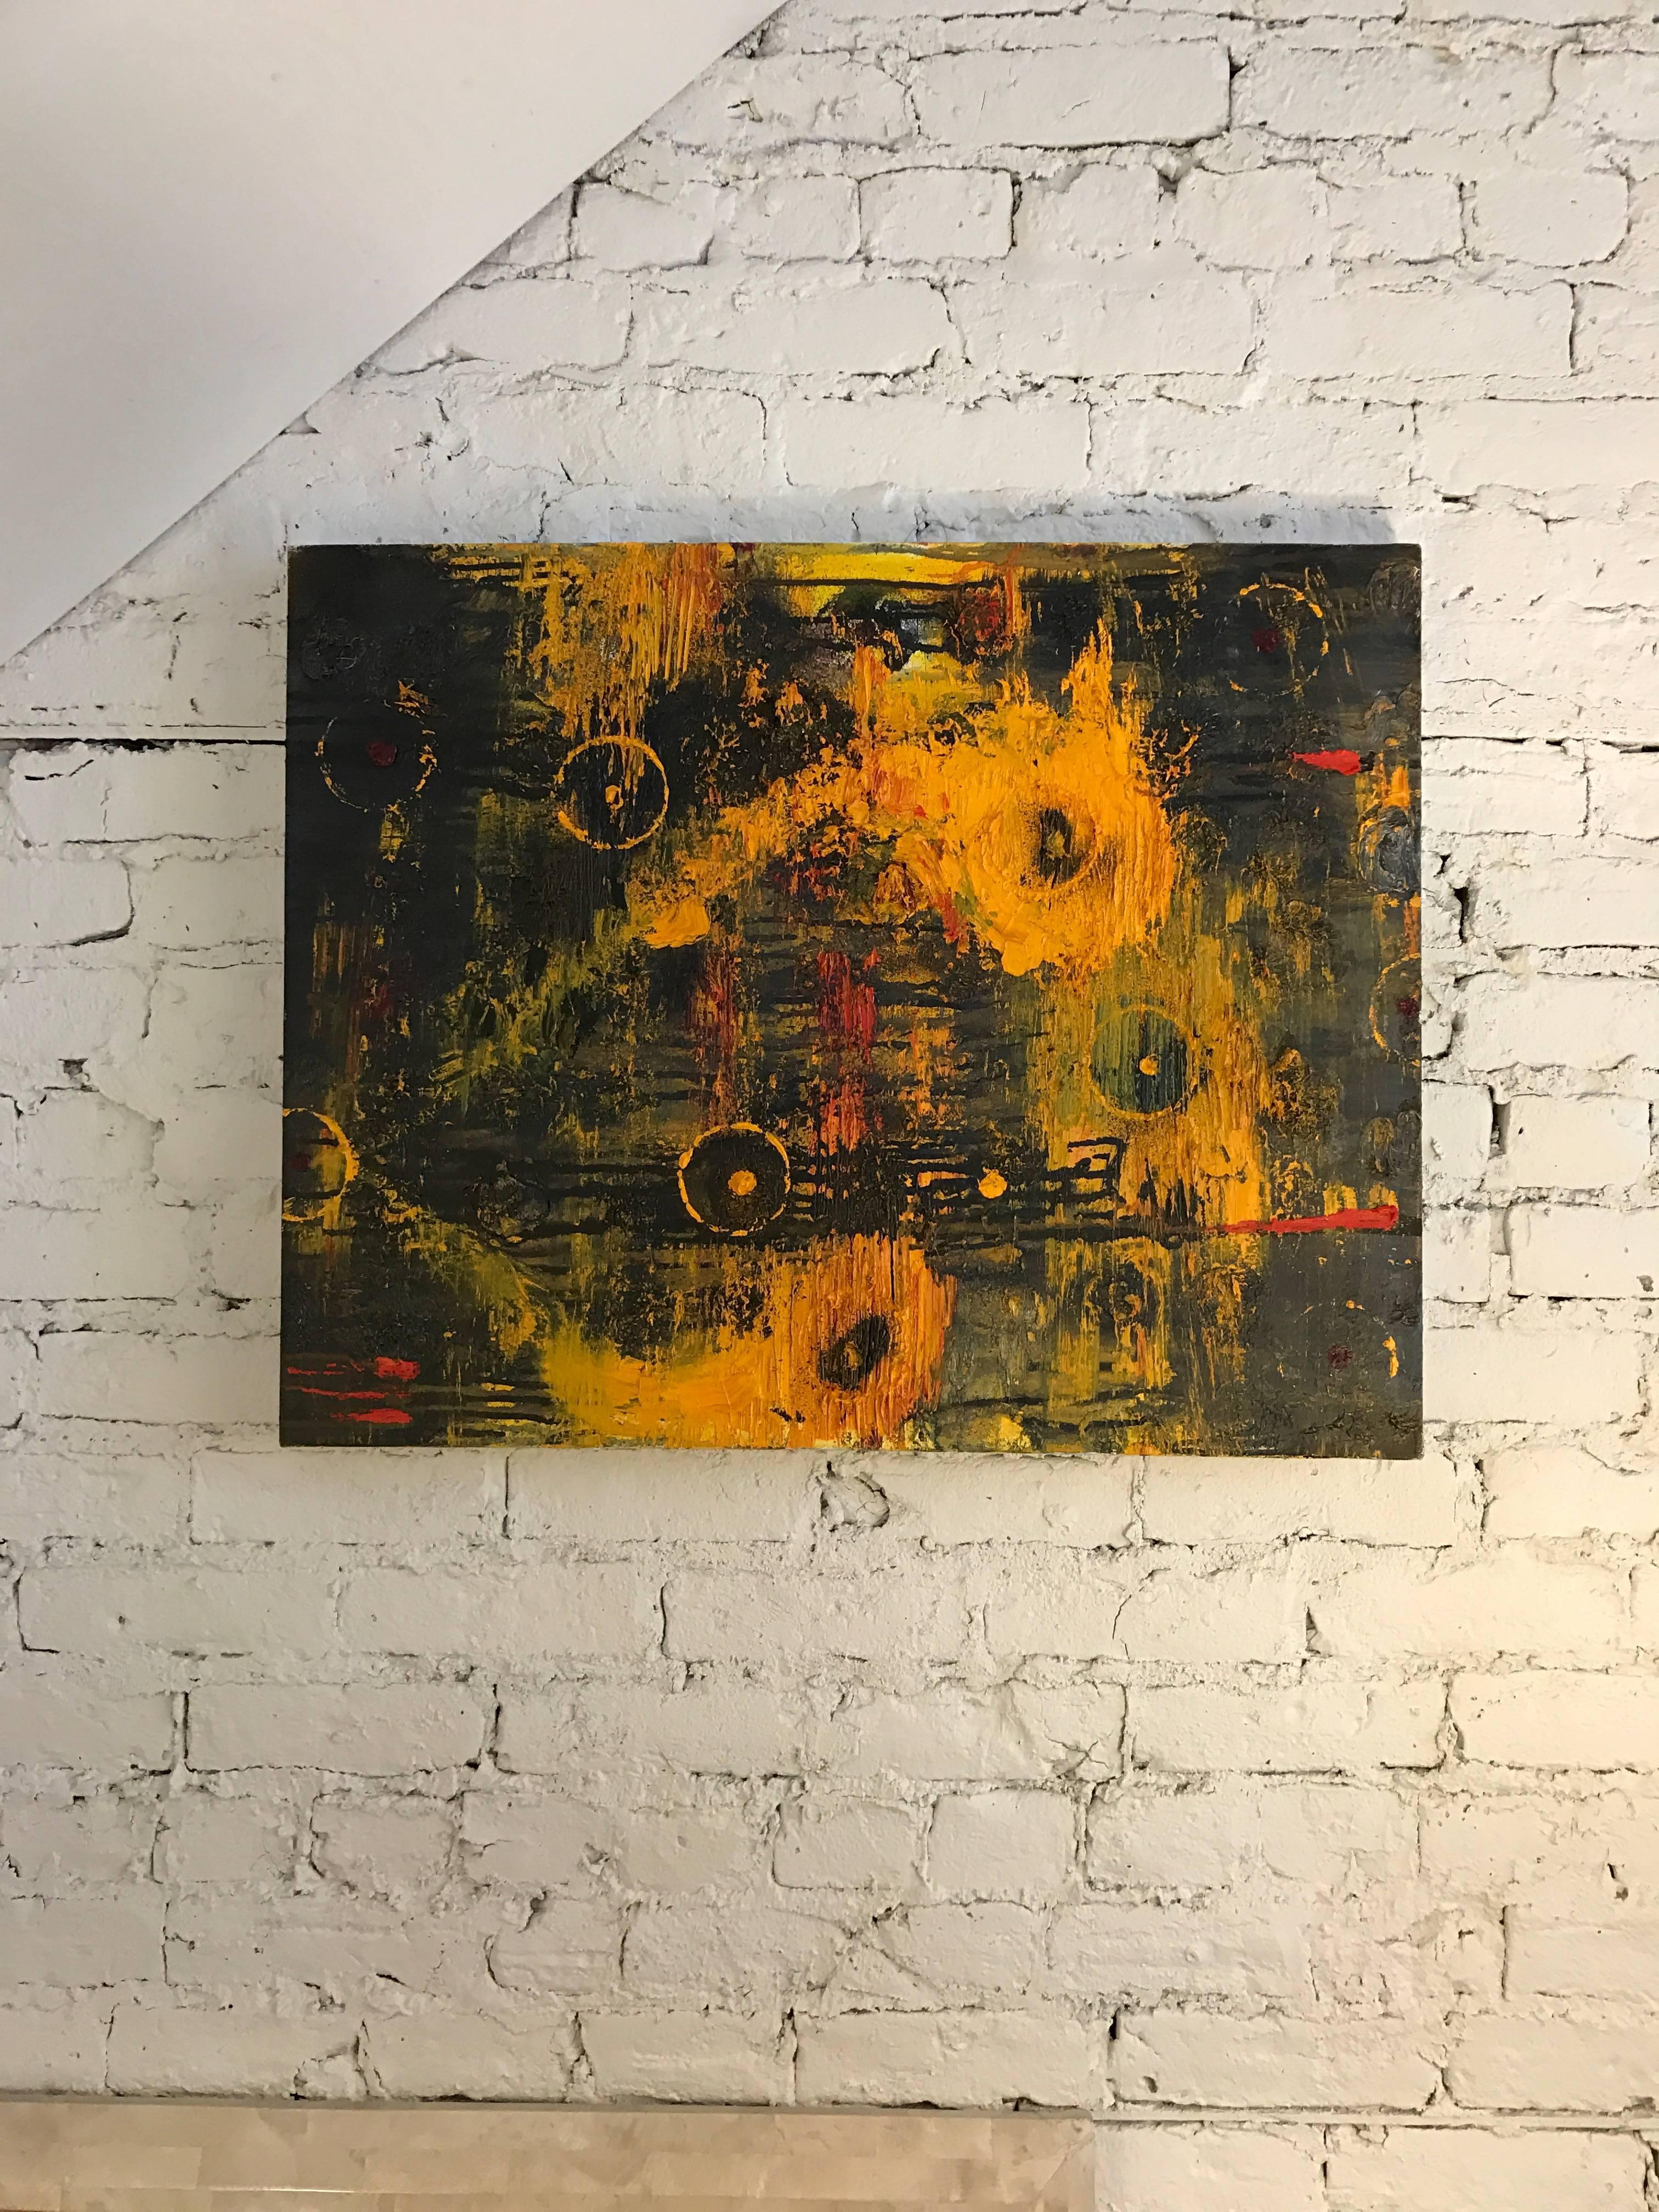 A dynamic modern abstract multicolored painting in heavily textured oils by Chicago artist Jay Miller. This powerful work would complement a modern or Classic interior.